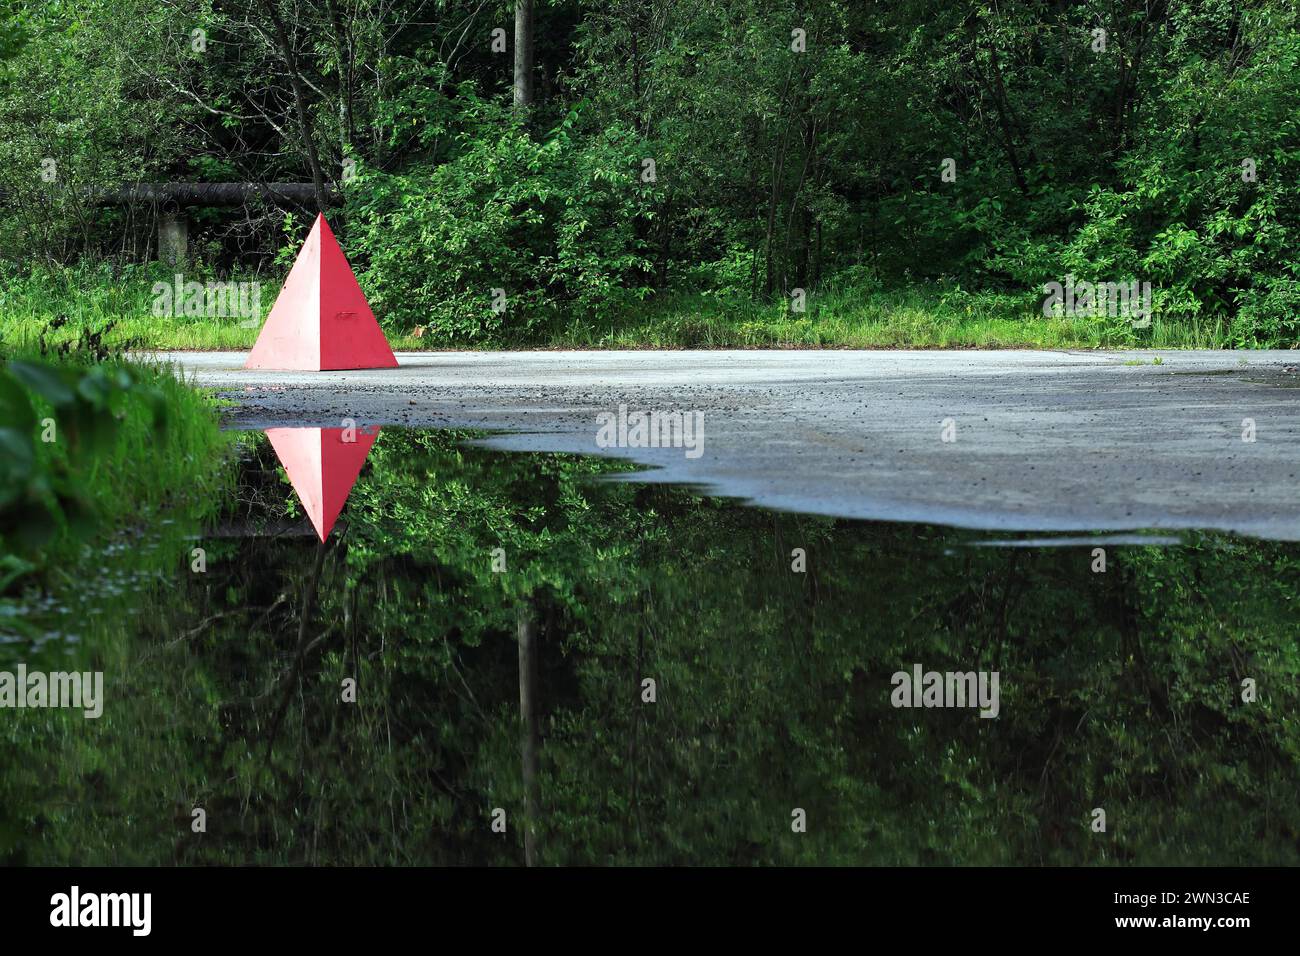 Red metal pyramid in forest with reflection in water Stock Photo